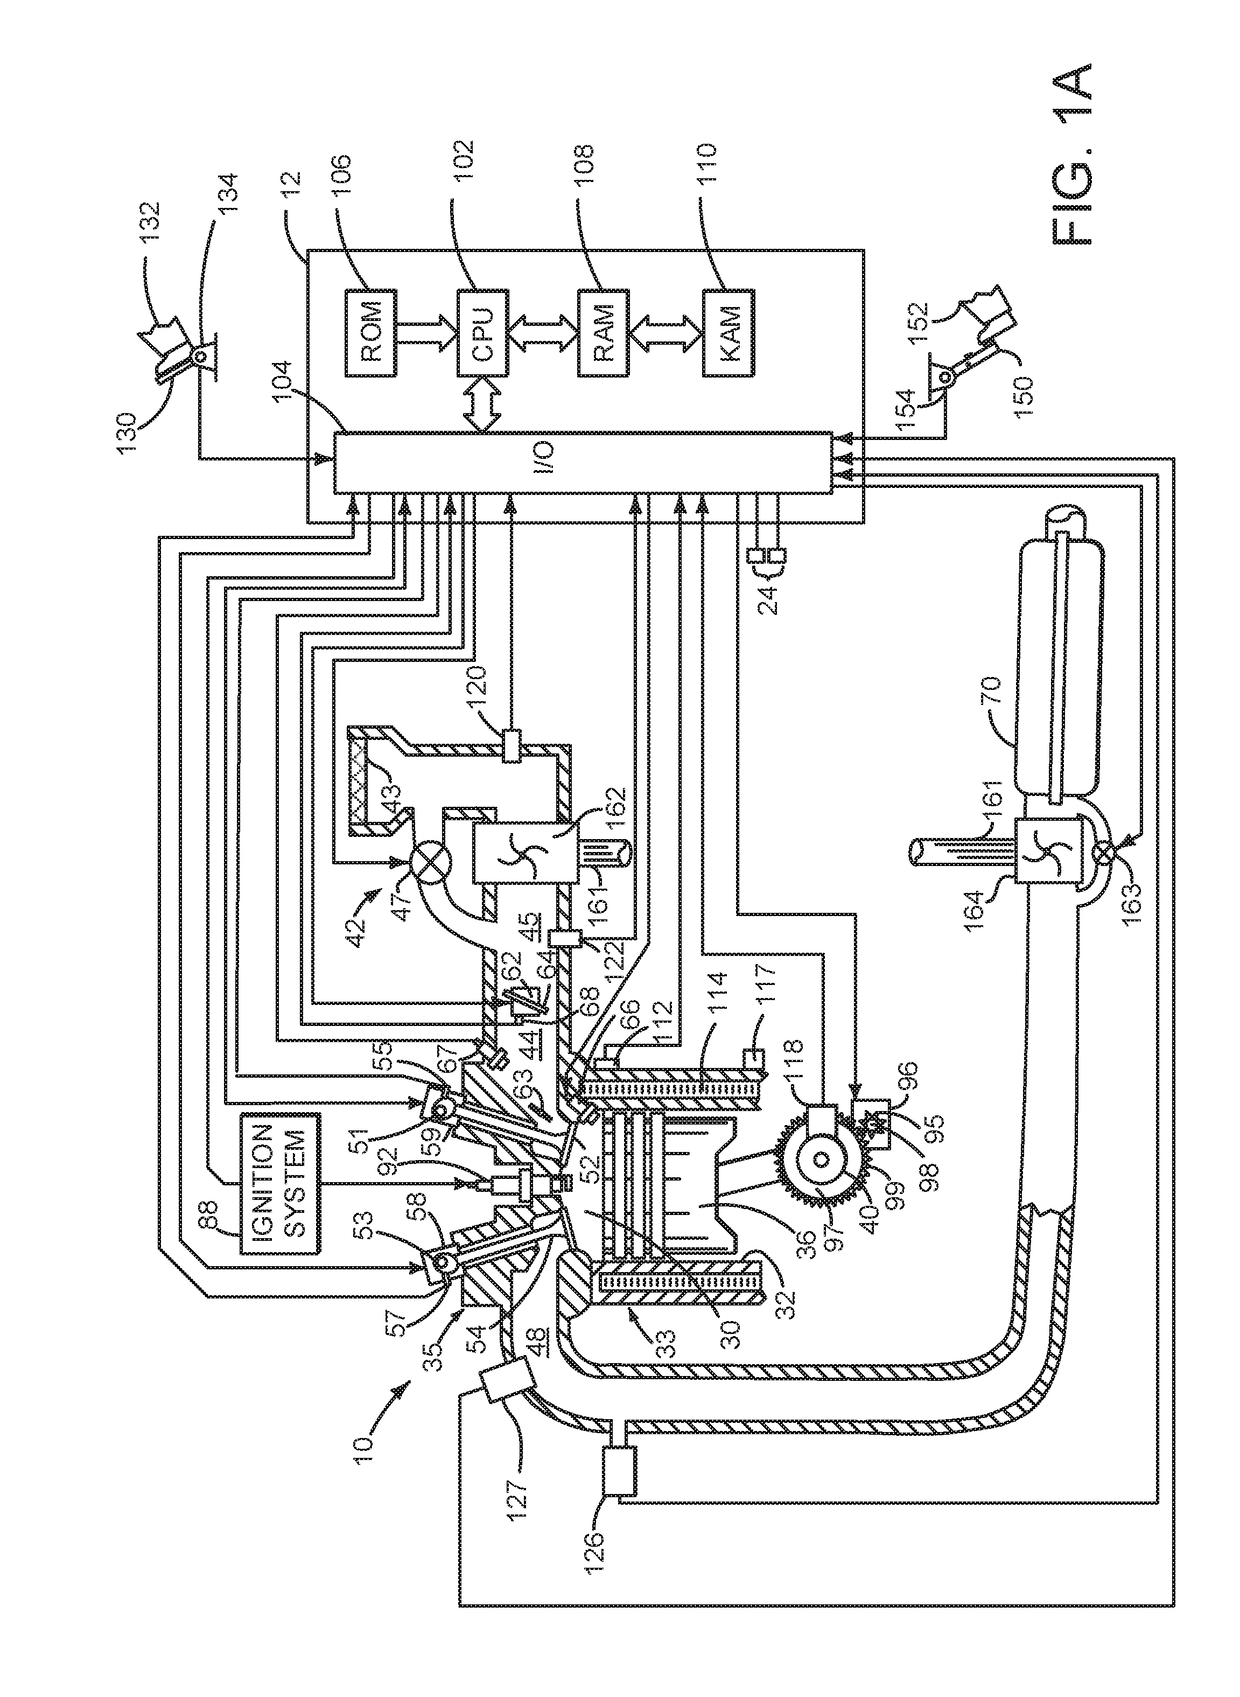 System and method for reactivating engine cylinders